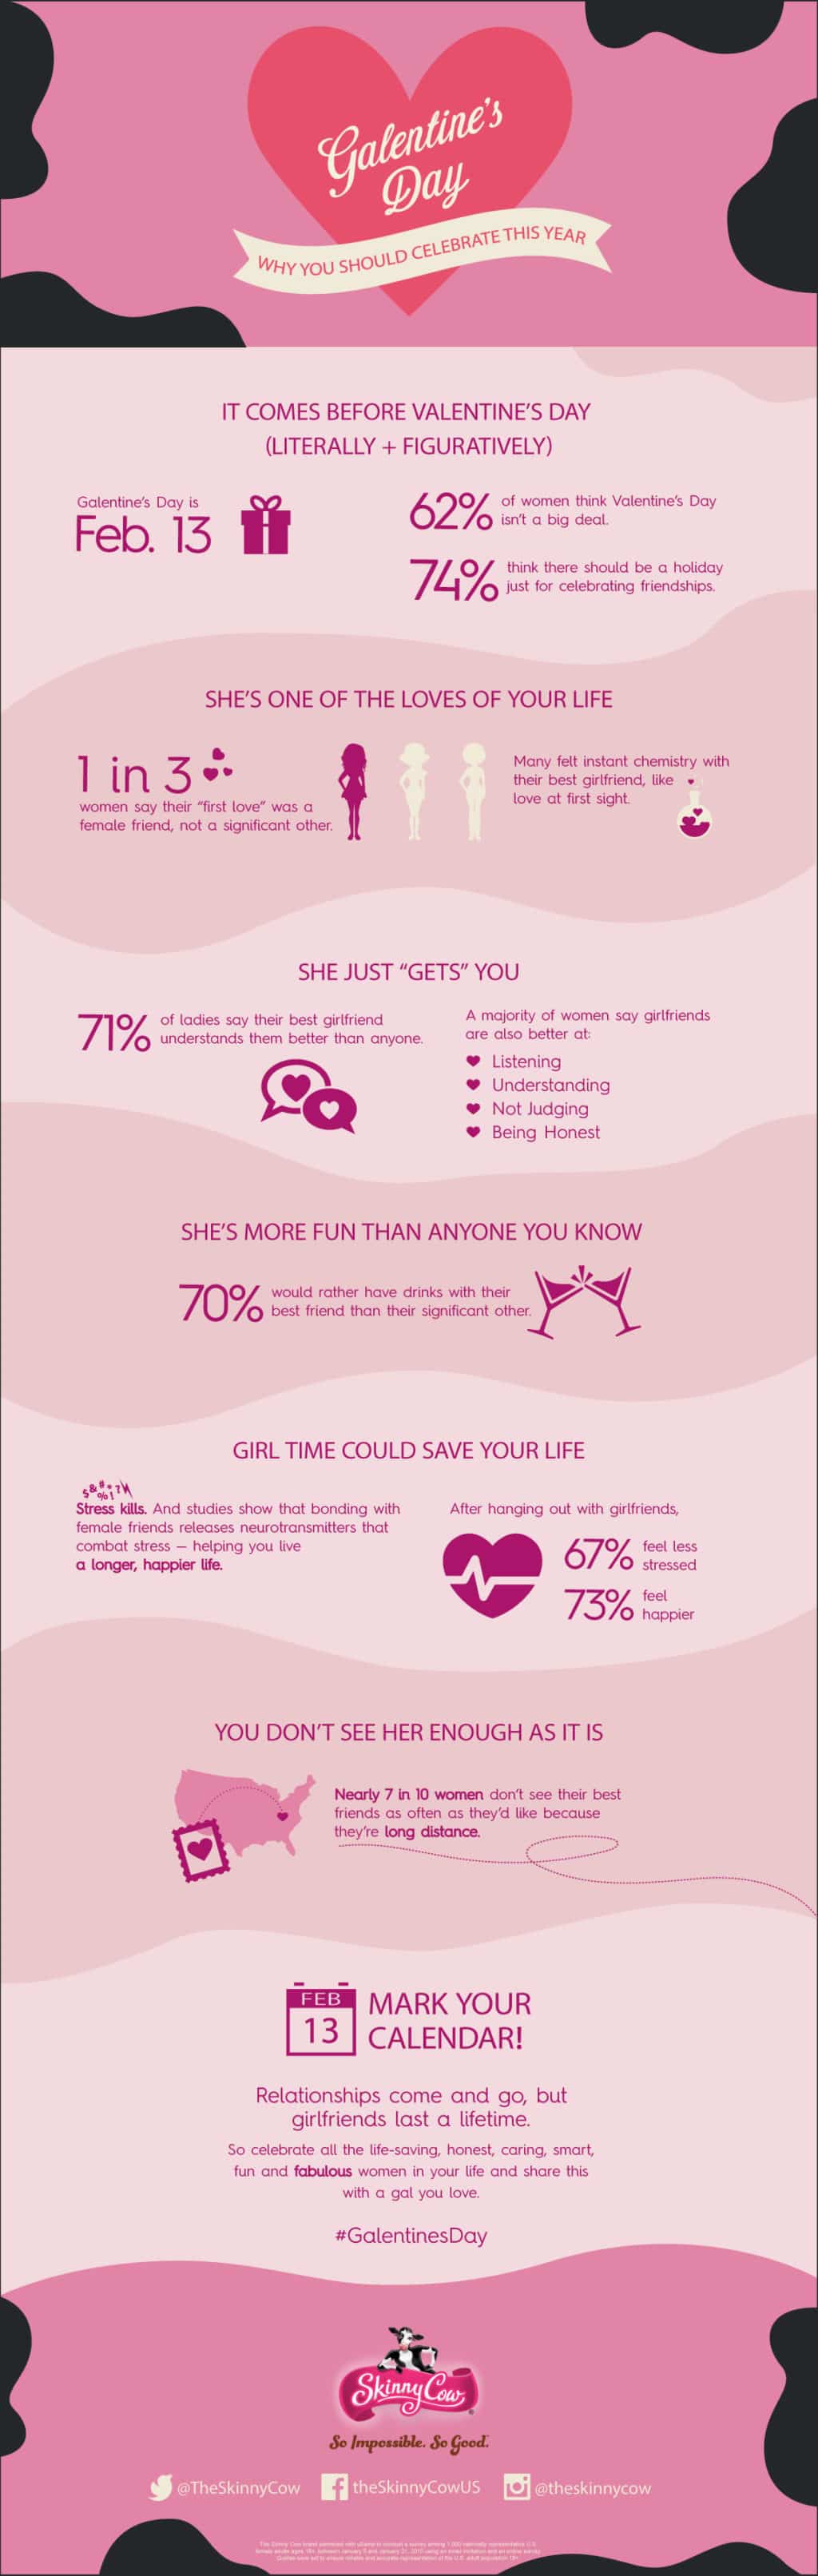 SC_GalentinesDay_Infographic_FINAL